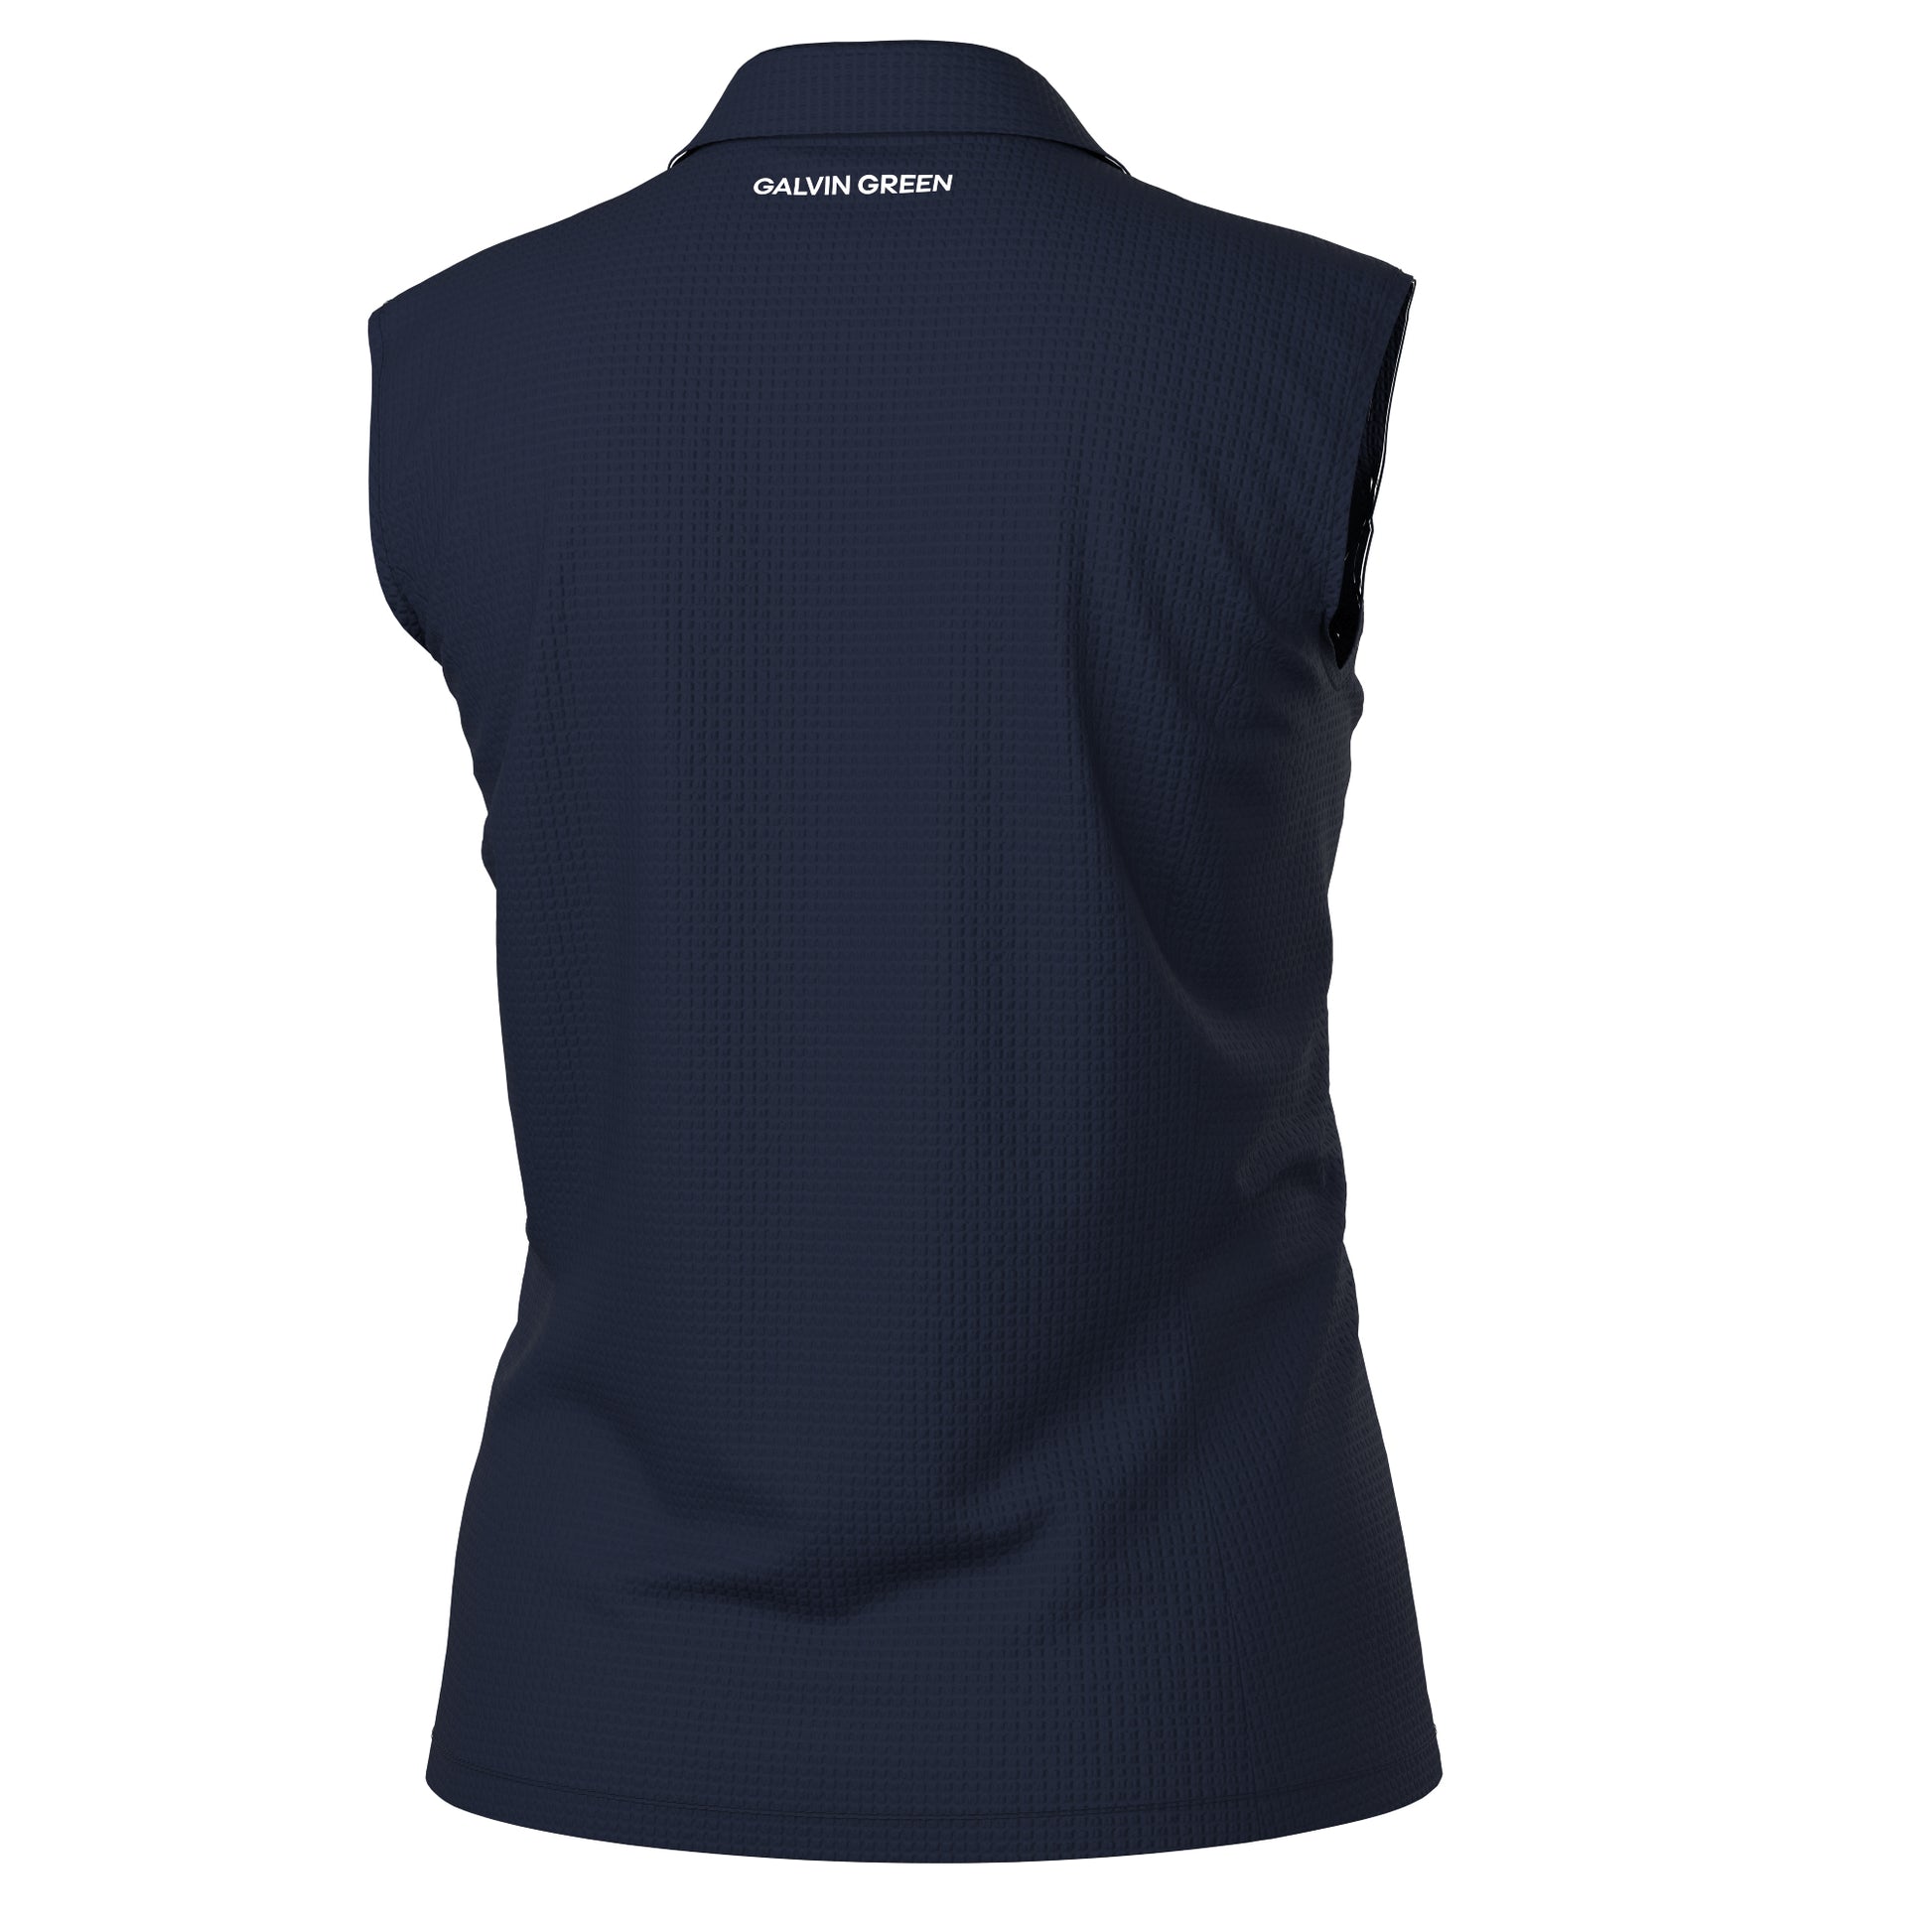 Galvin Green Ladies VENTIL8 PLUS Textured Sleeveless Polo in Navy